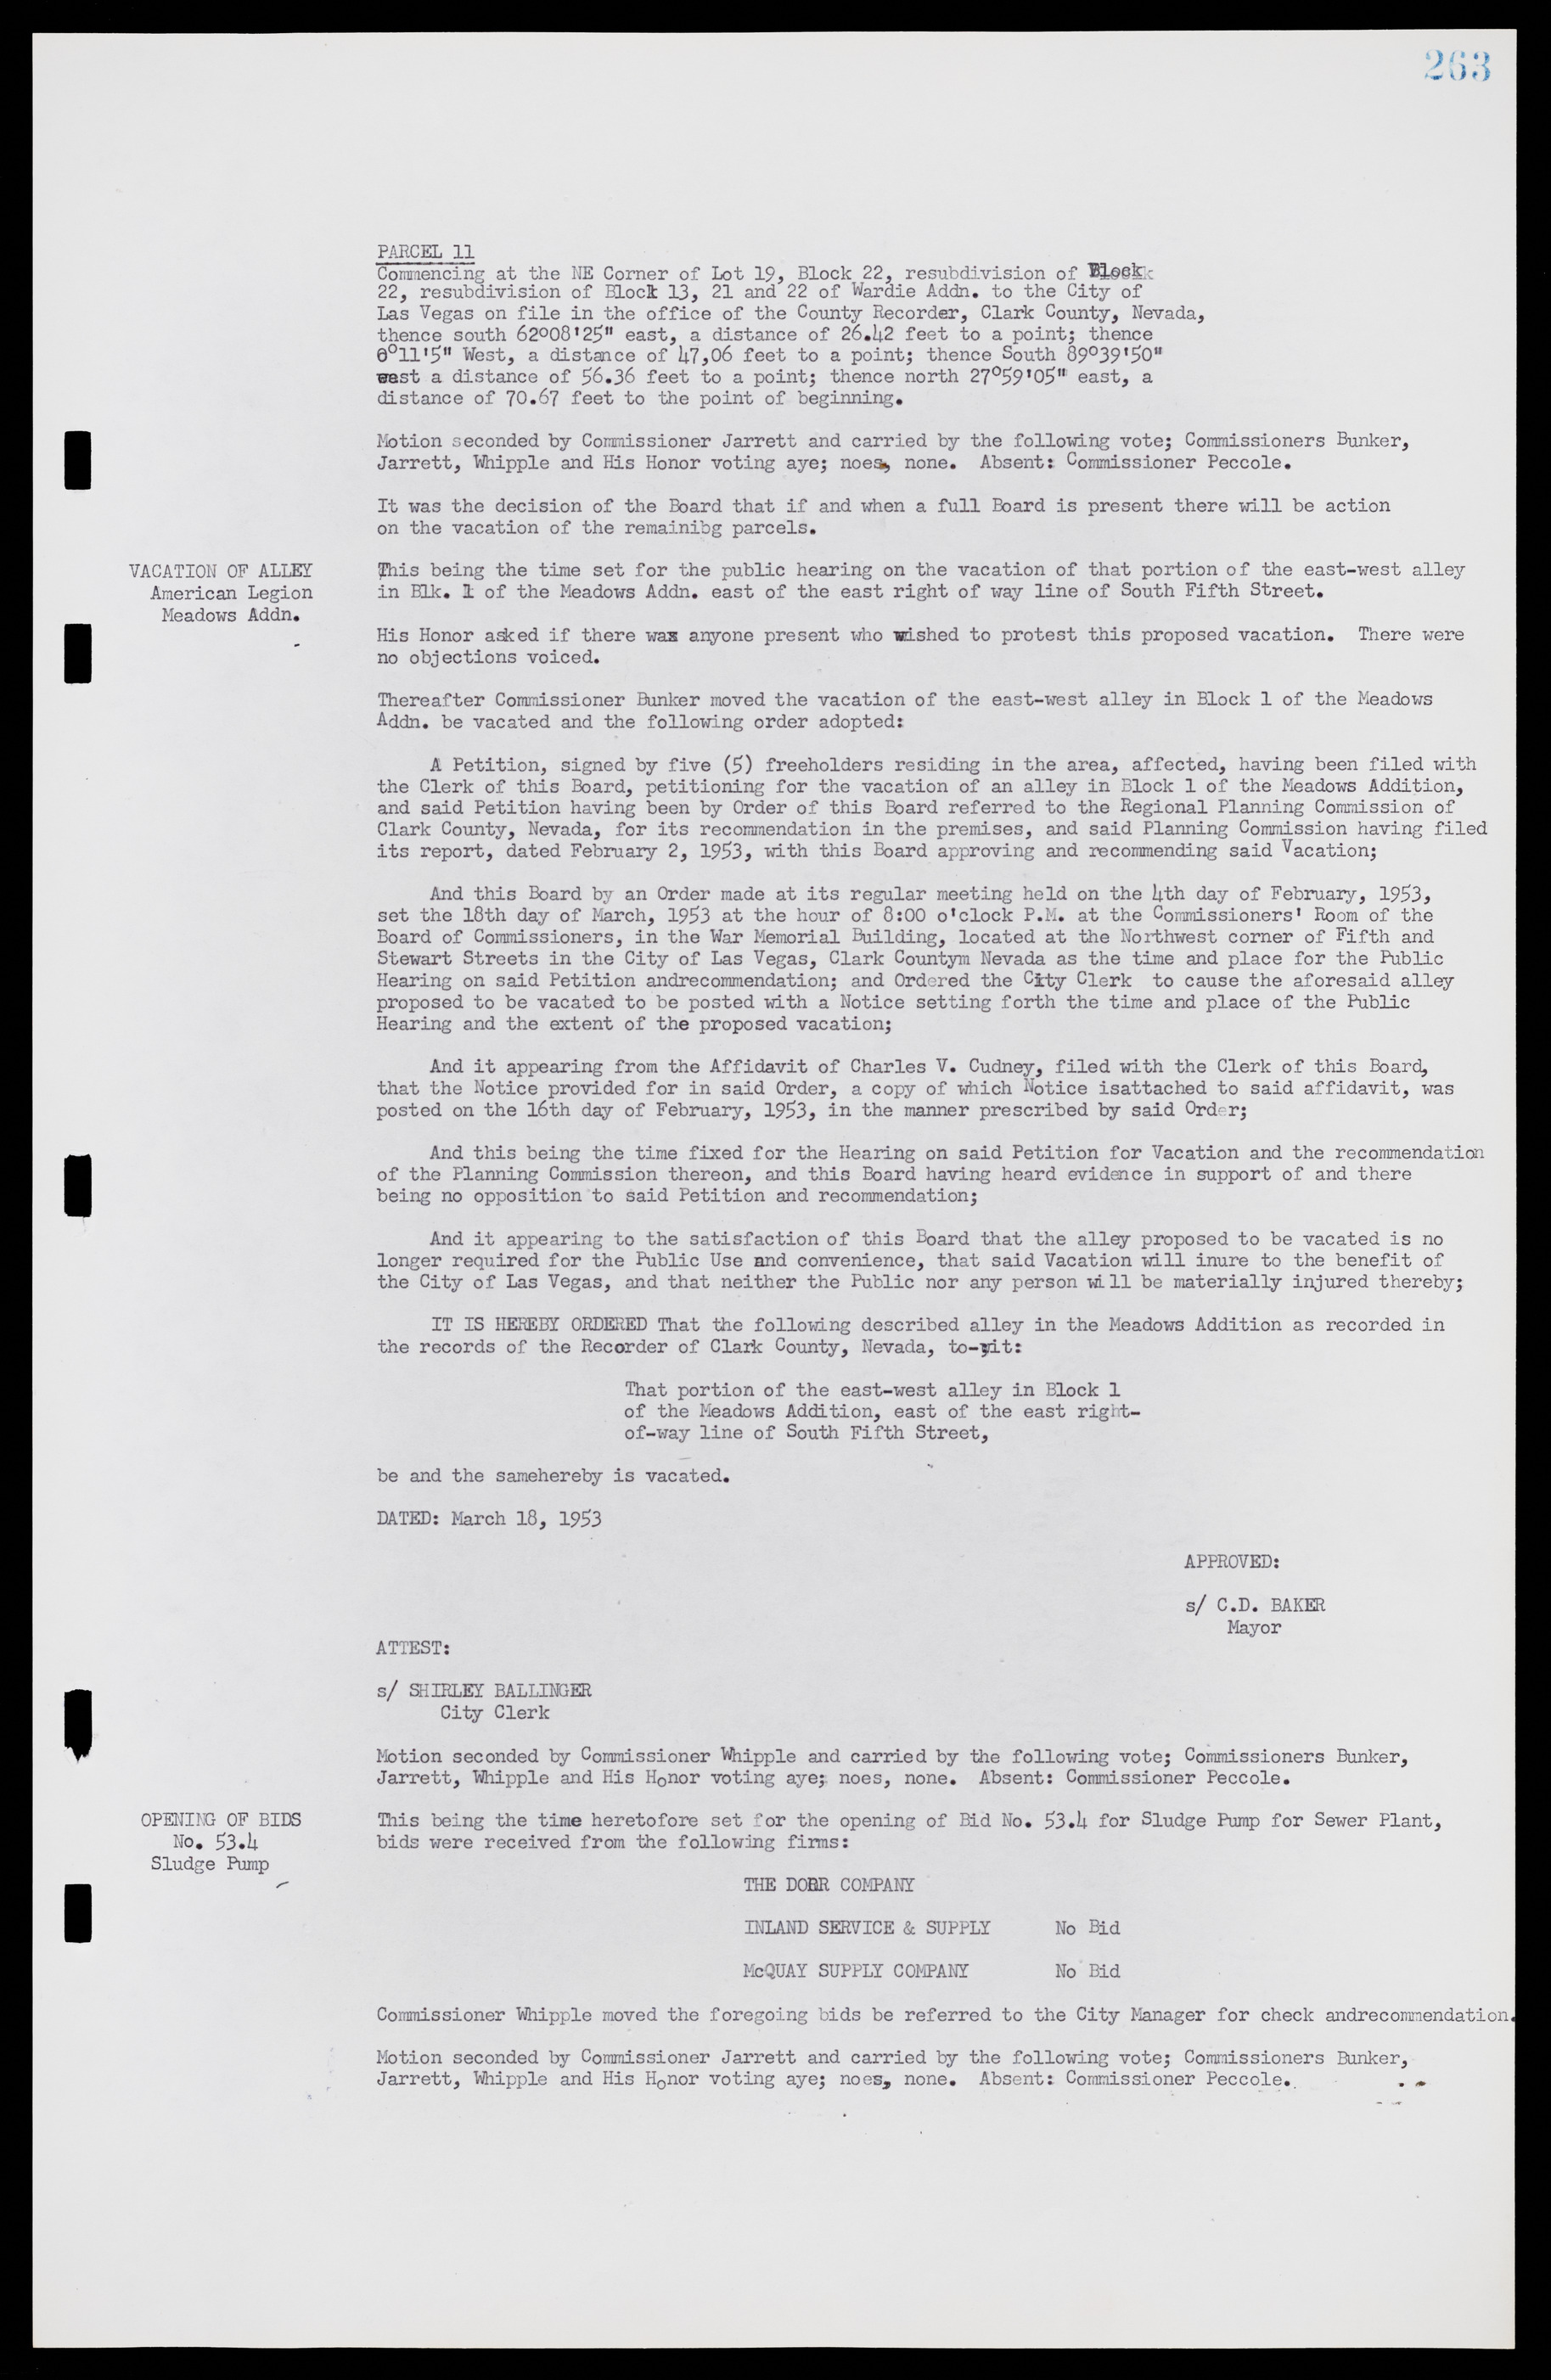 Las Vegas City Commission Minutes, May 26, 1952 to February 17, 1954, lvc000008-279